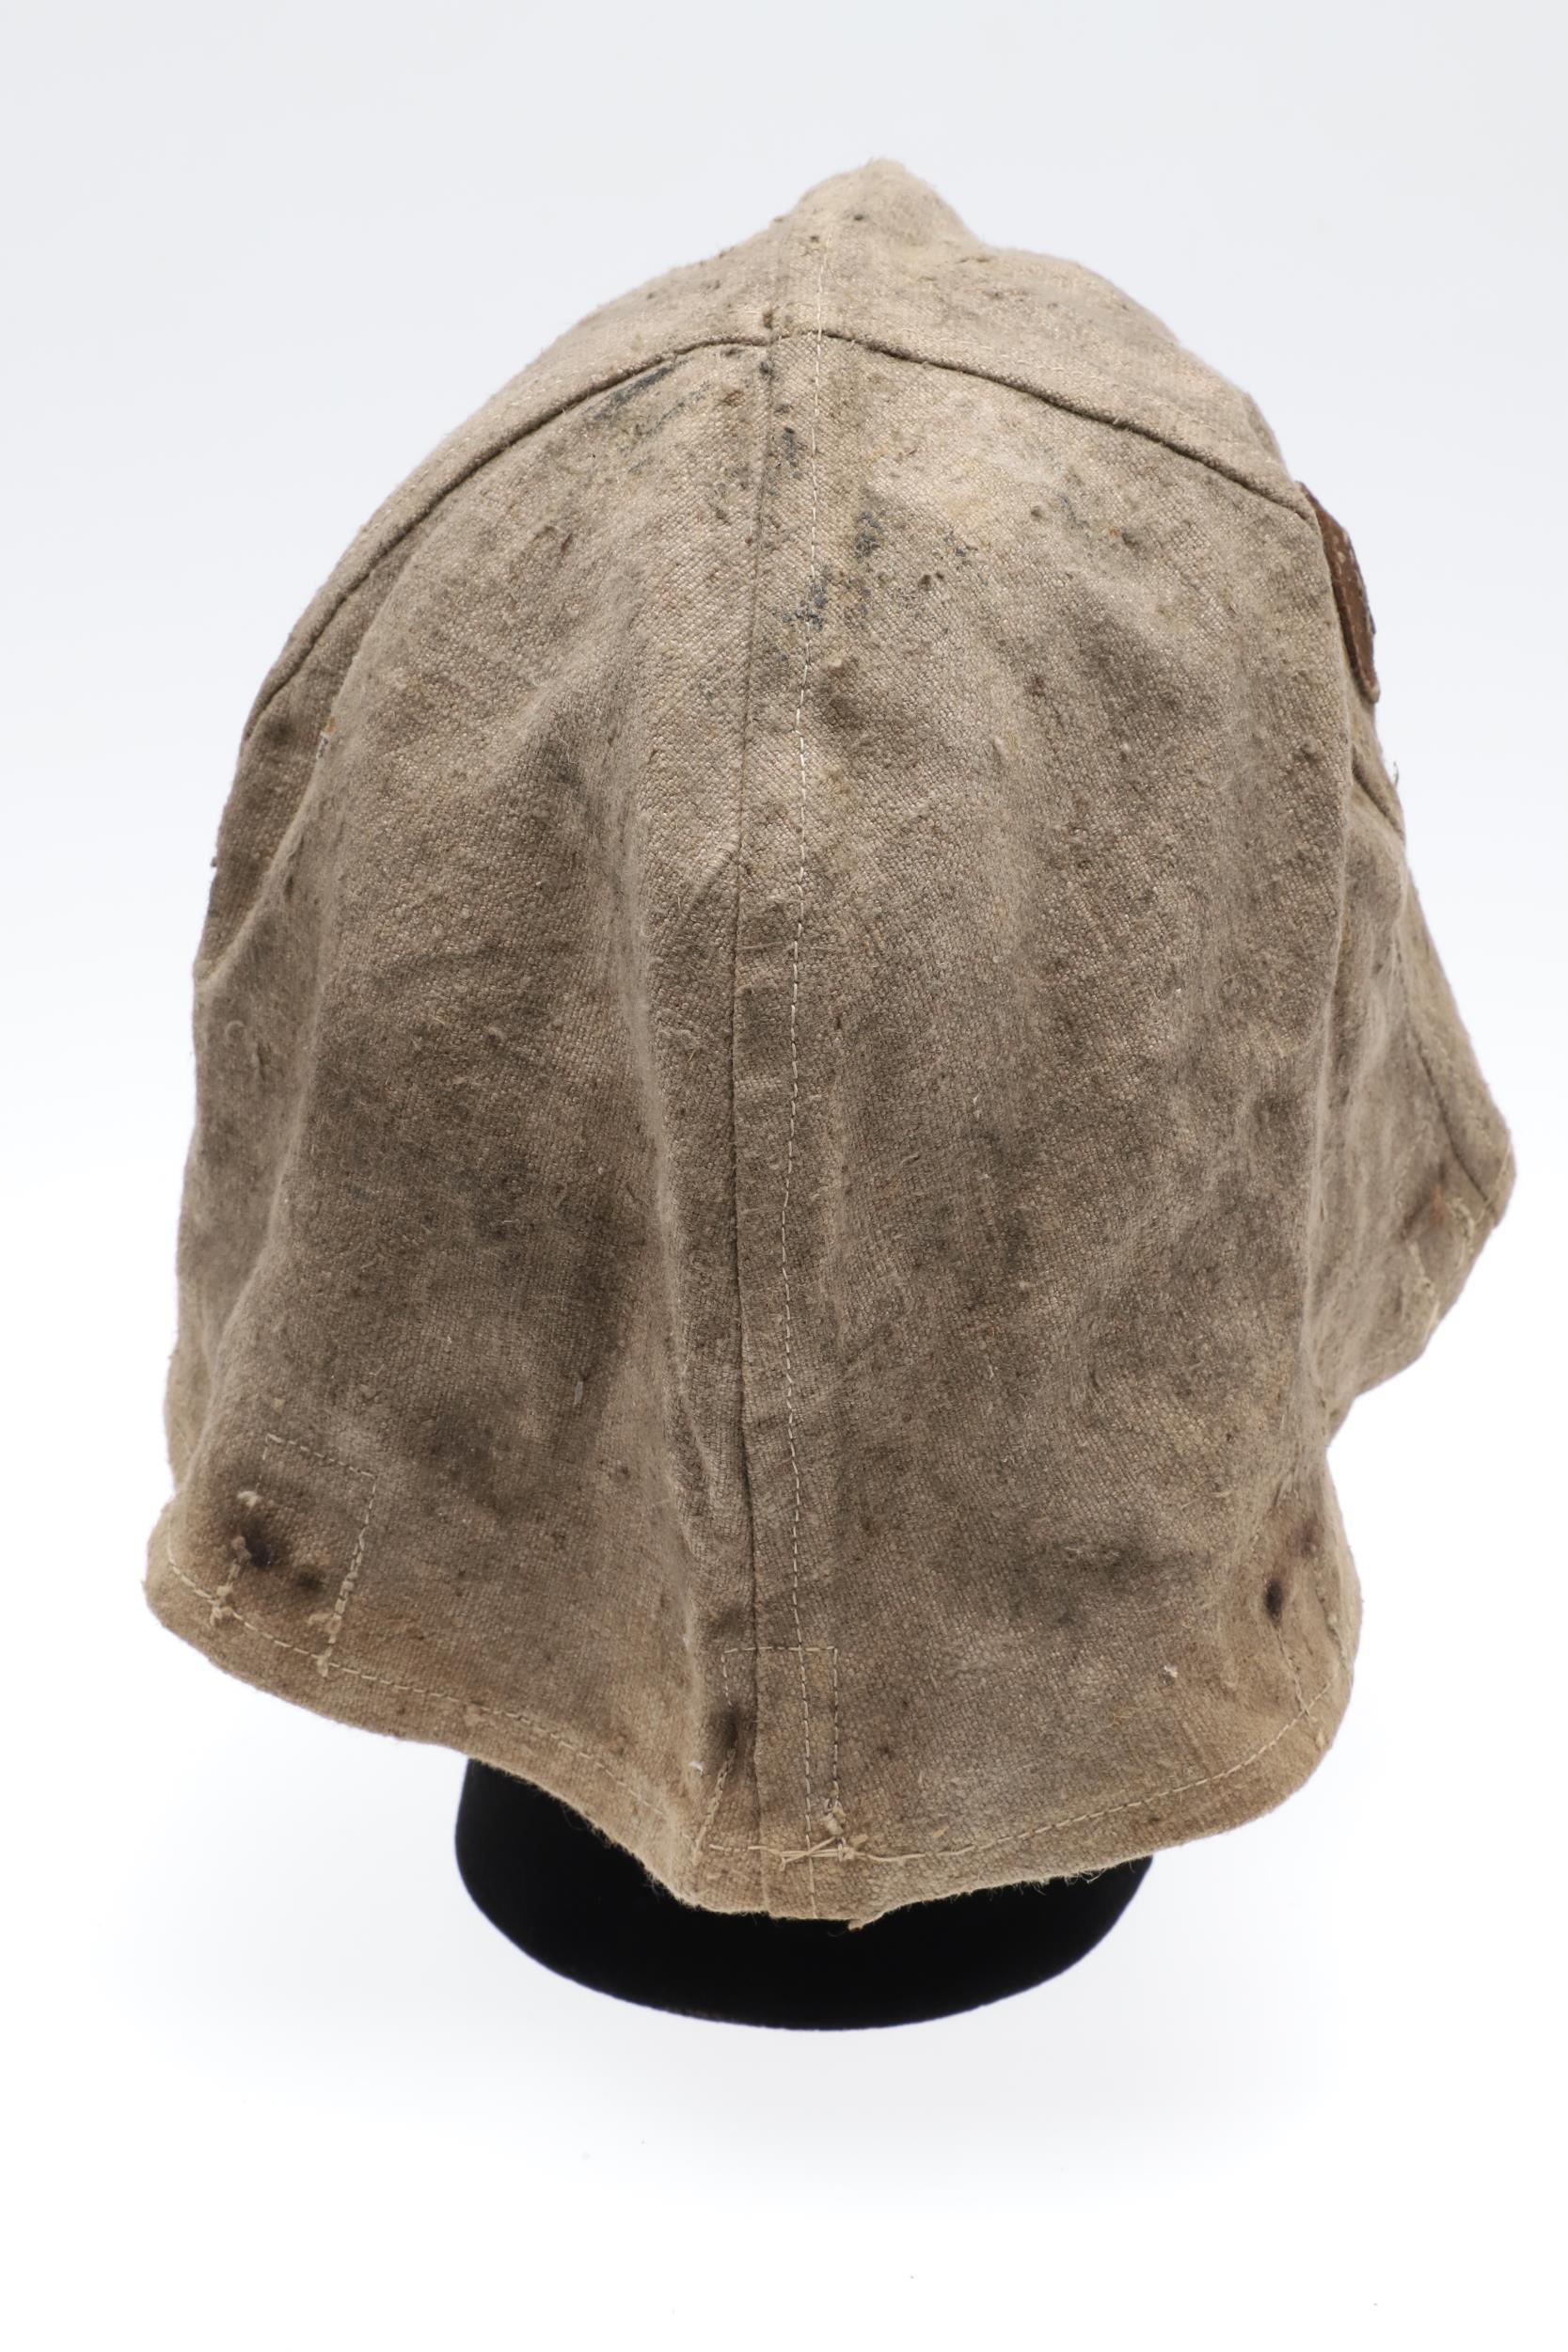 A FIRST WORLD WAR GERMAN STEEL HELMET CLOTH COVER. - Image 4 of 7